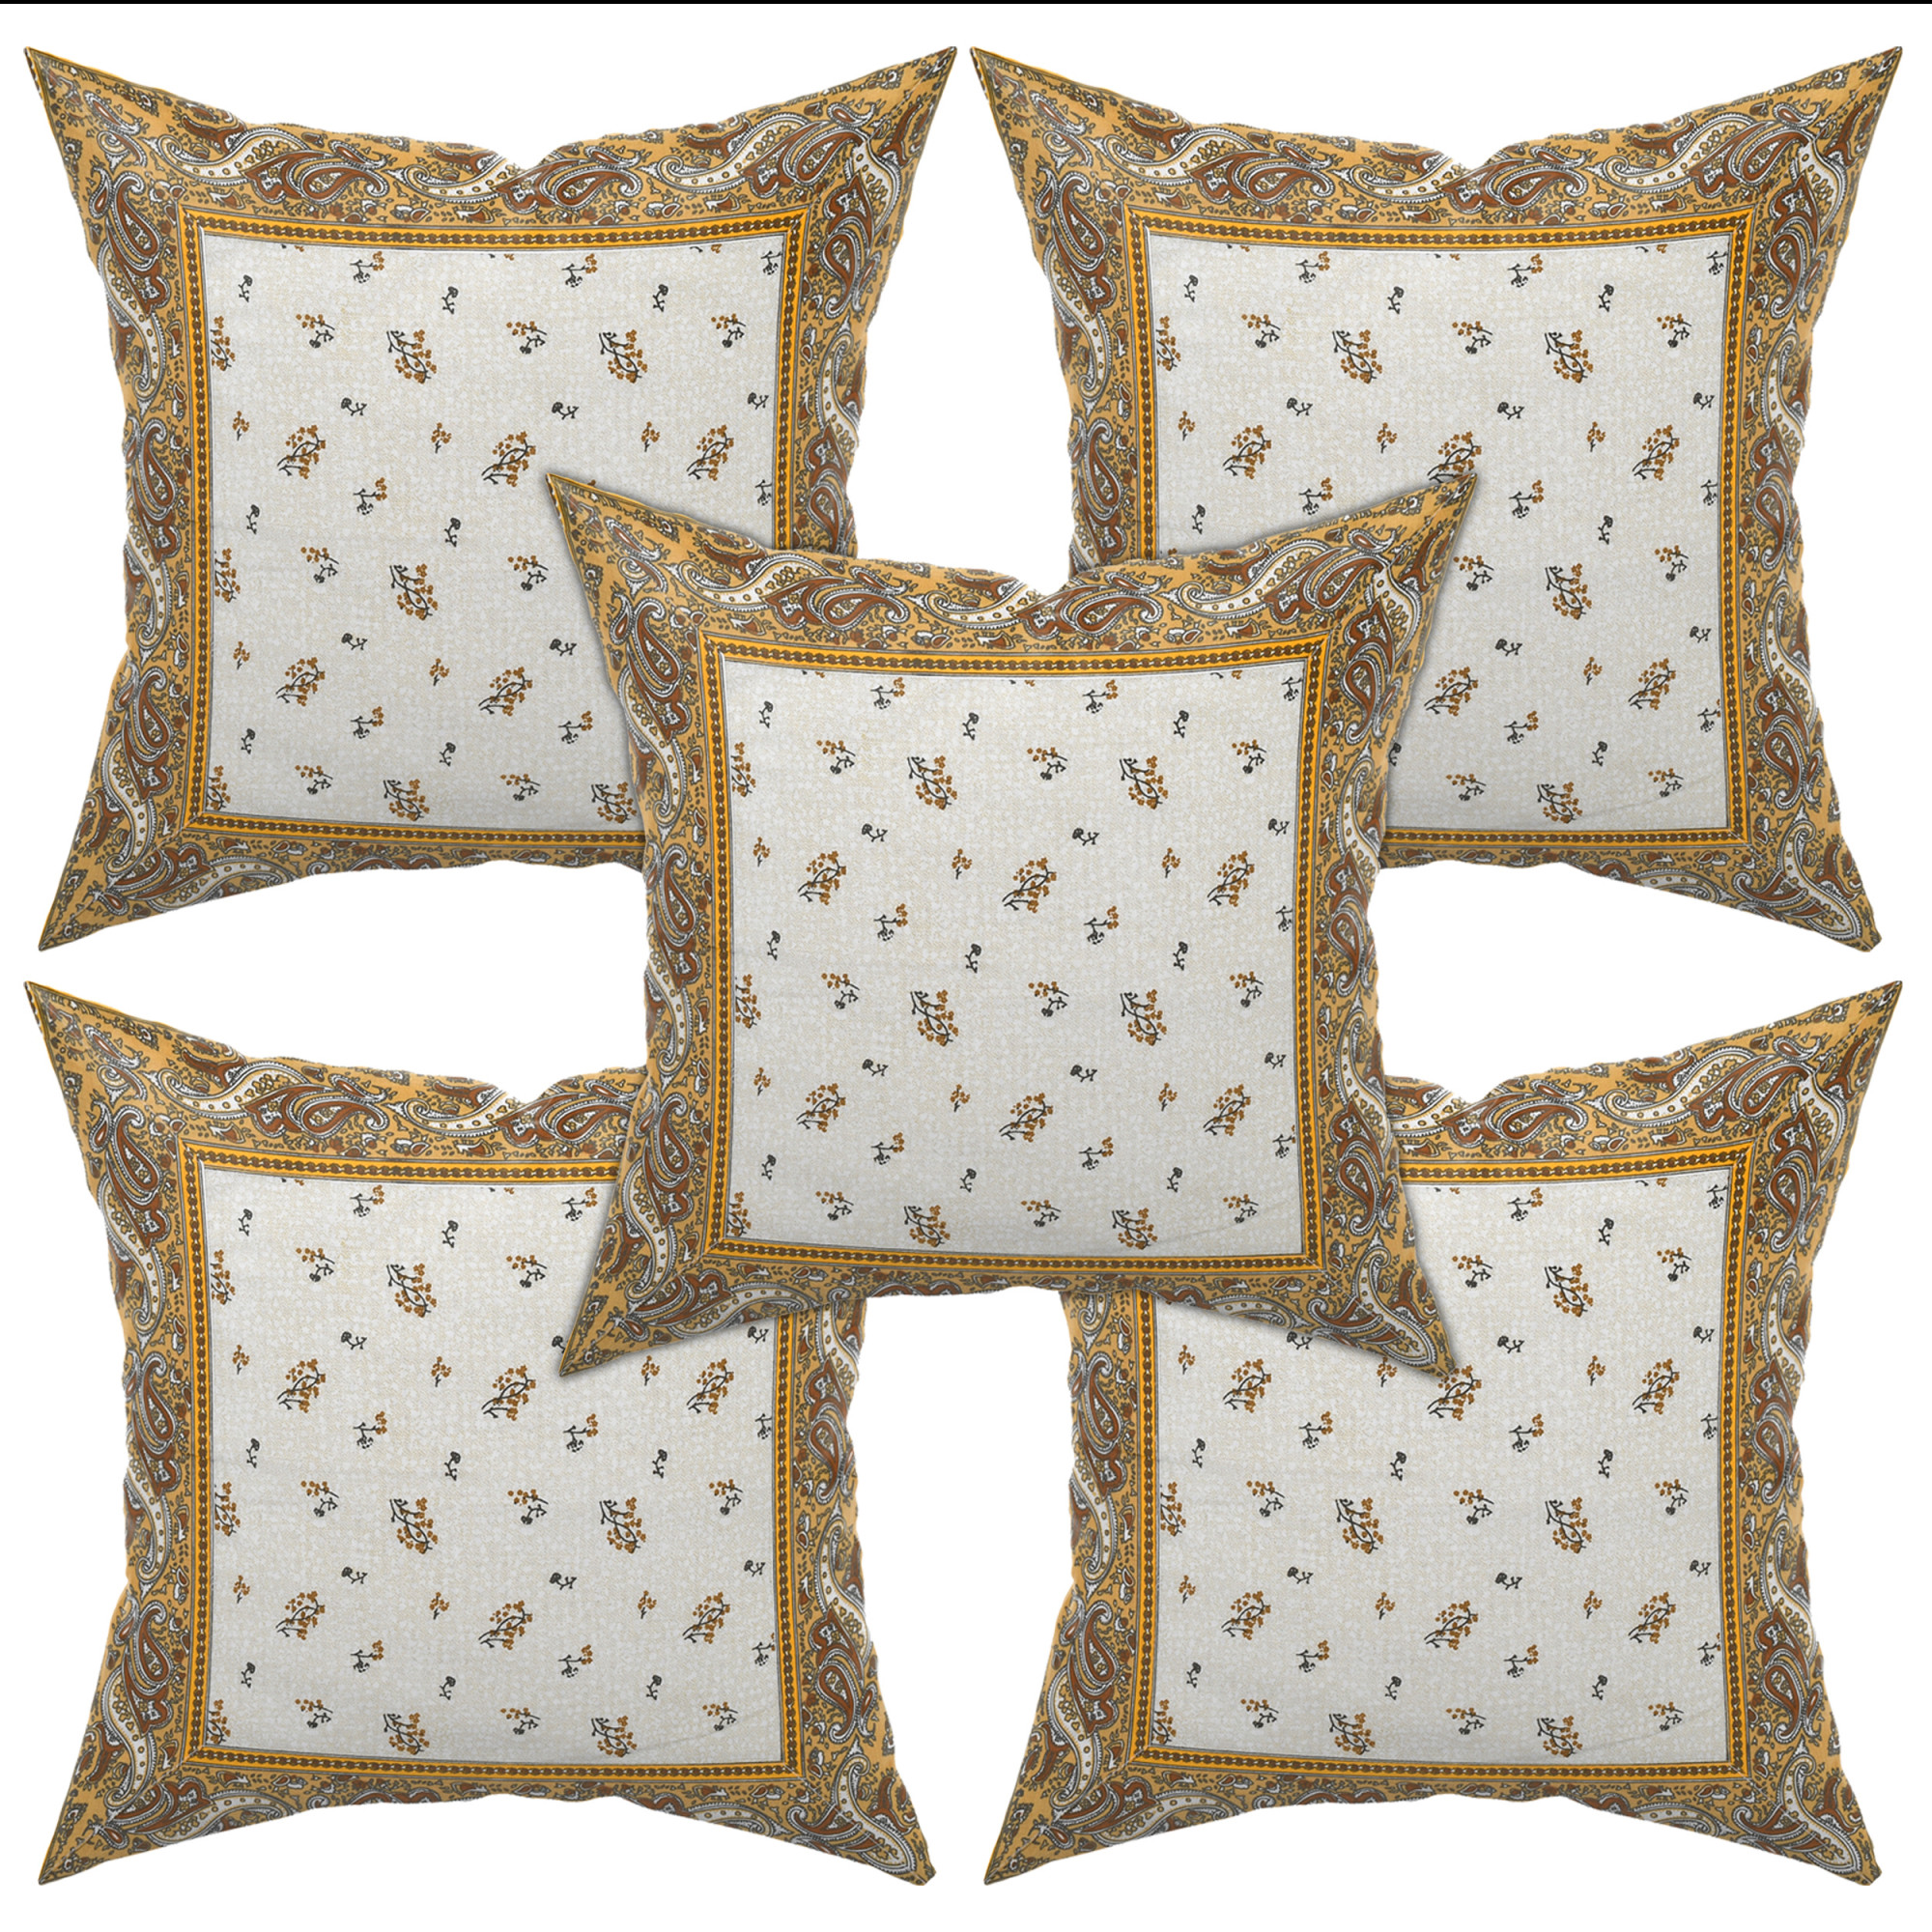 Kuber Industries Floral Design Cotton Abstract Decorative Throw Pillow/Cushion Covers 16